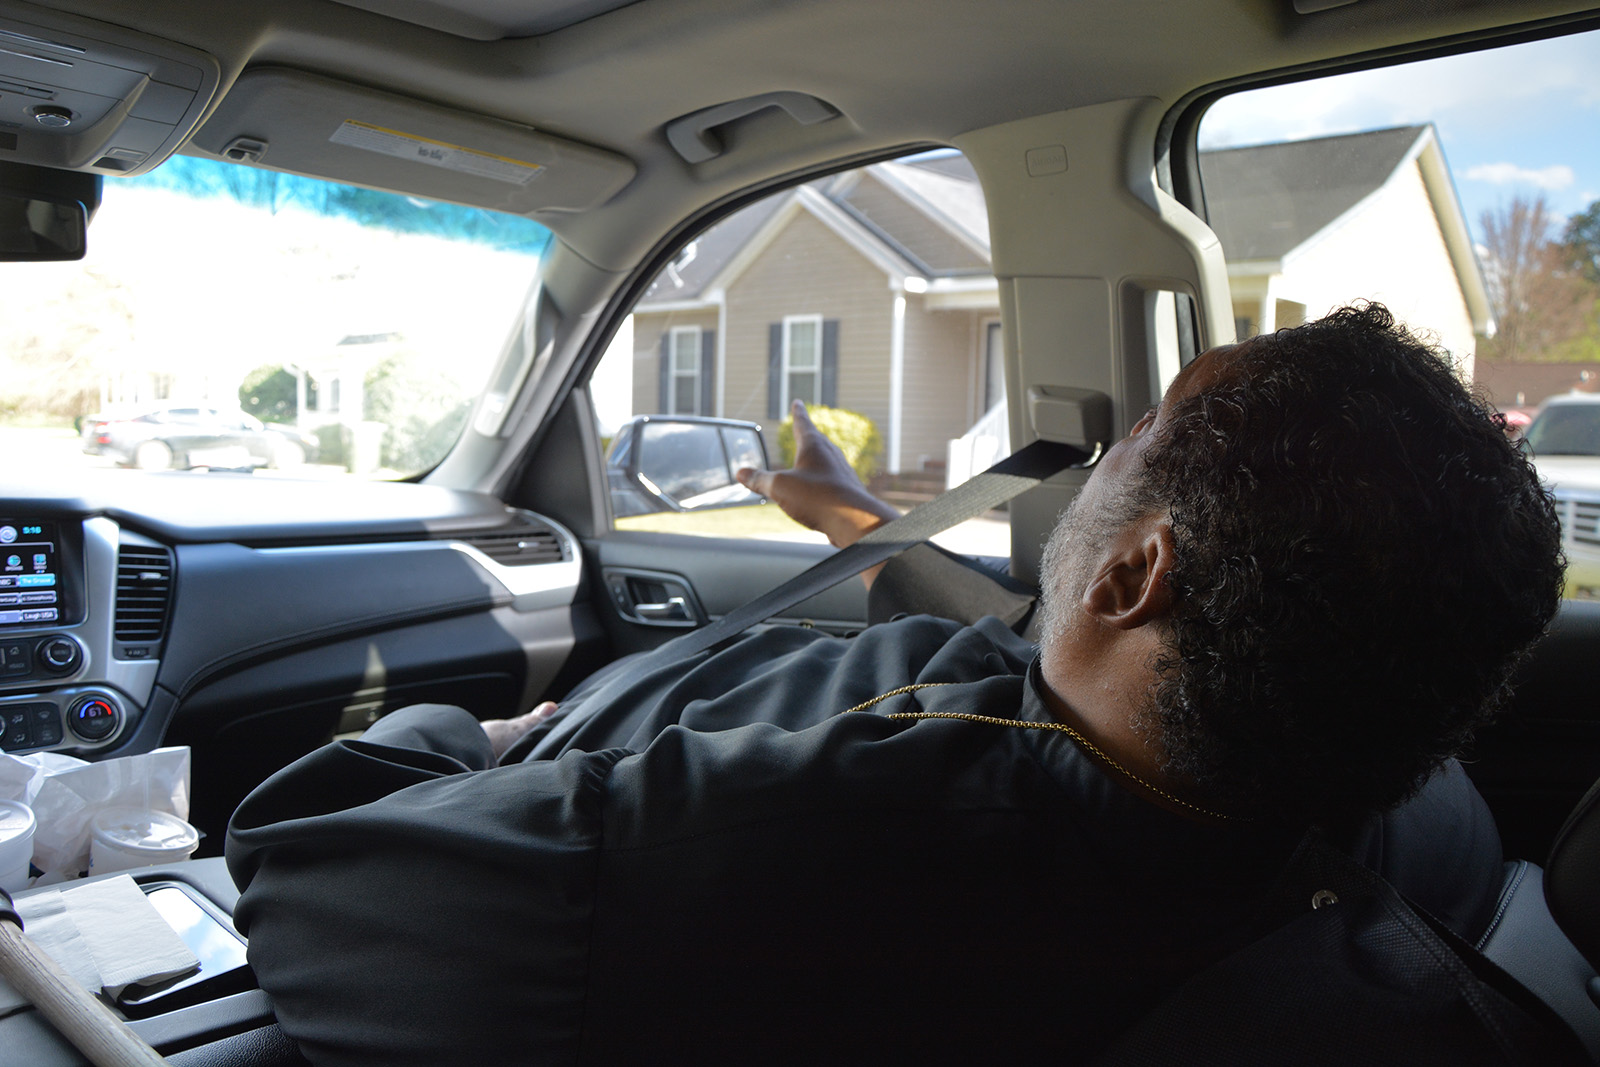 The Rev. William Barber II points out locations while driving around Goldsboro, North Carolina, Saturday, March 26, 2022. RNS photo by Jack Jenkins